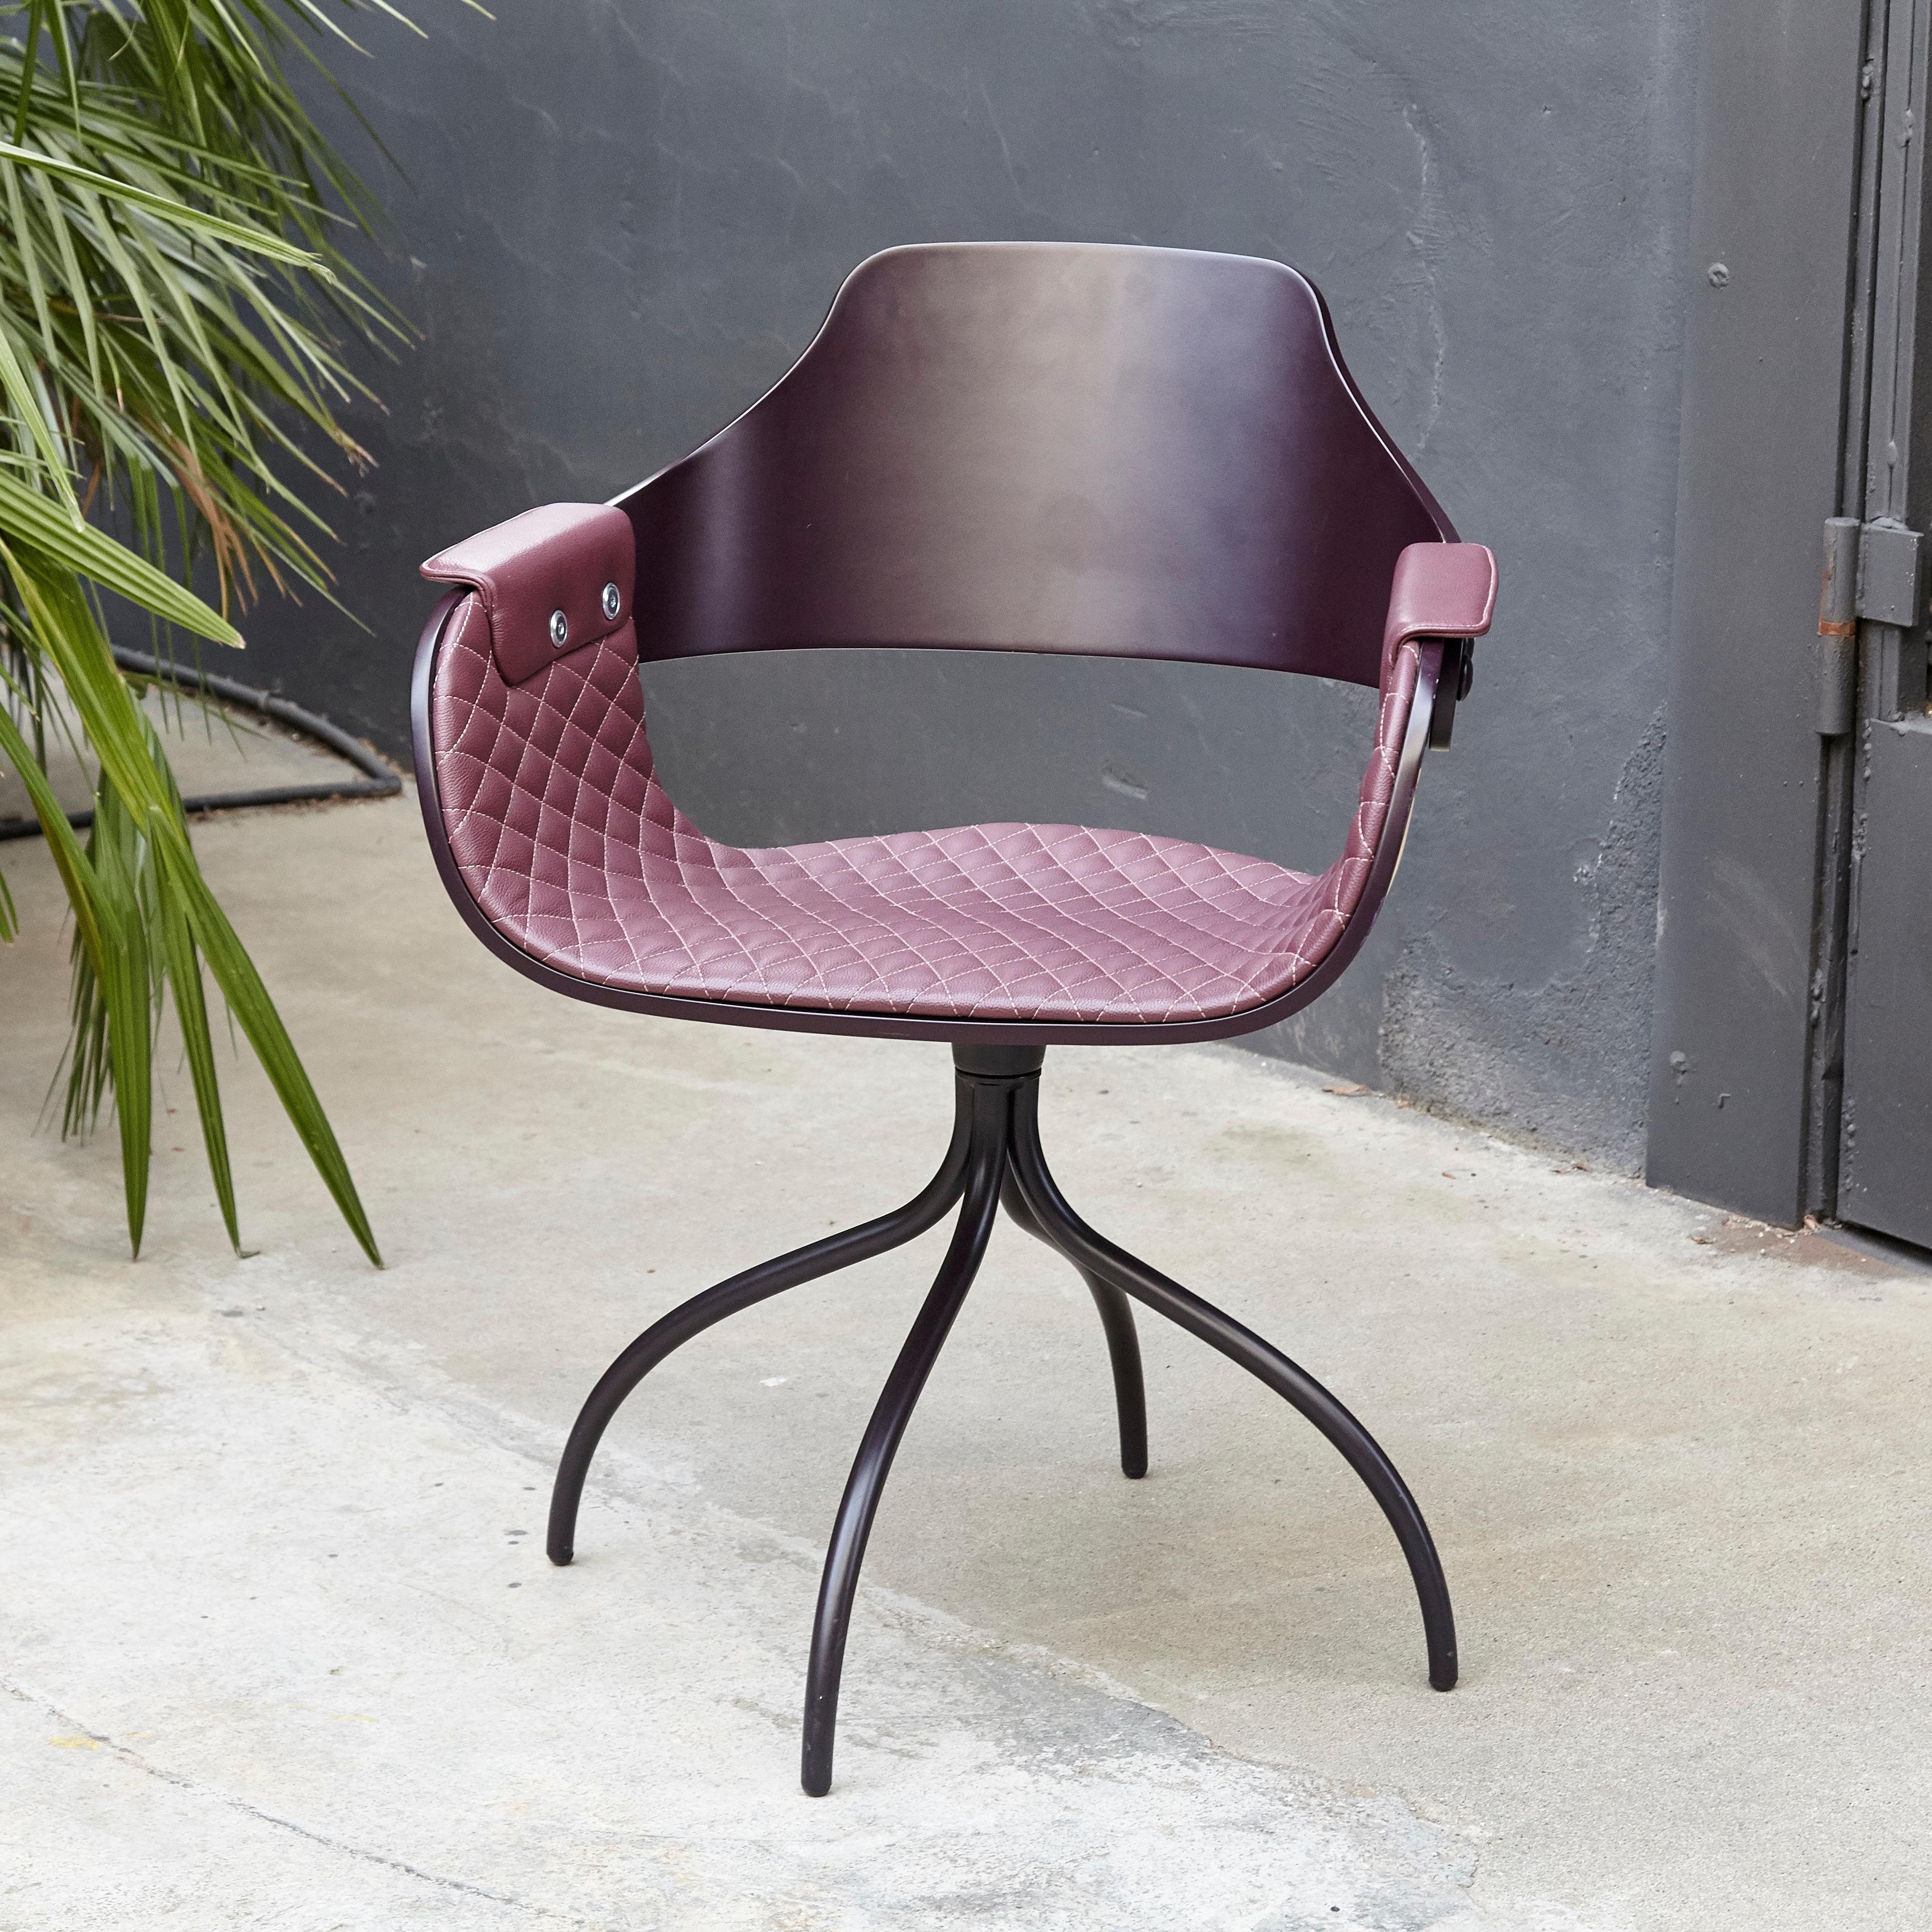 Modern Jaime Hayon, Contemporary Upholstered Purple Wood Chair Showtime by BD Barcelona